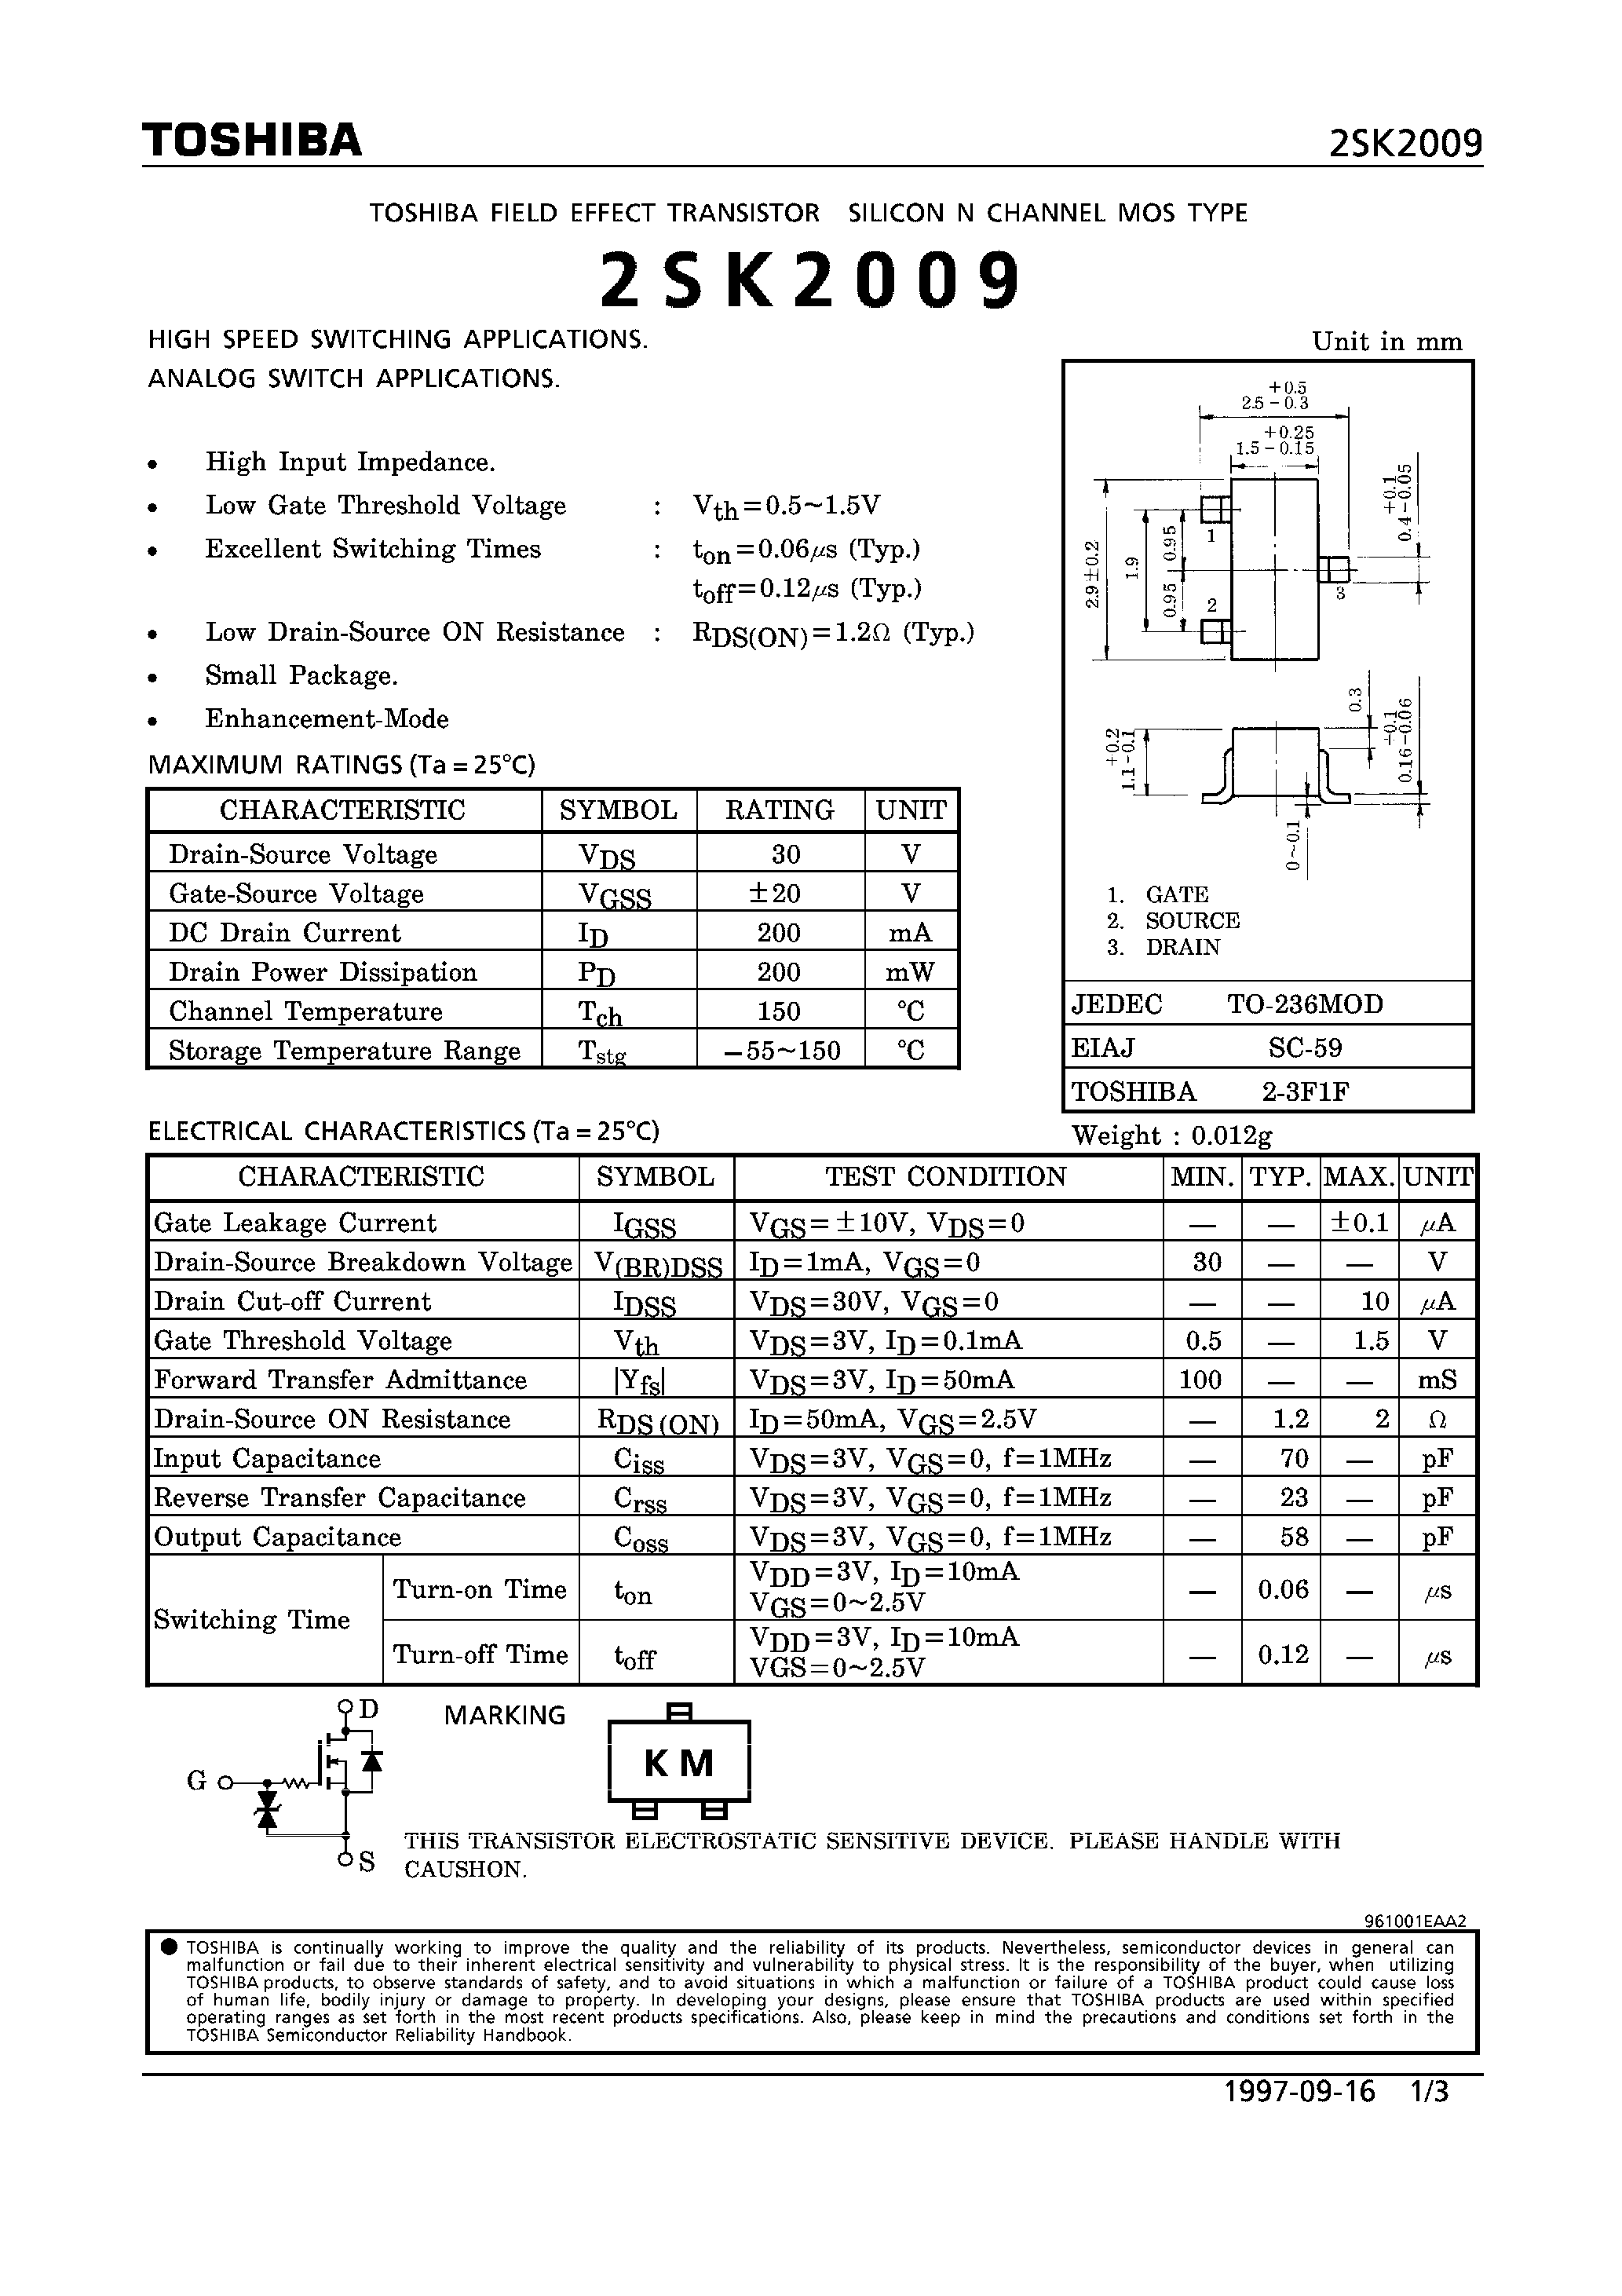 Datasheet 2SK2009 - N CHANNEL MOS TYPE (HIGH SPEED SWITCHING/ ANALOG SWITCH APPLICATIONS) page 1